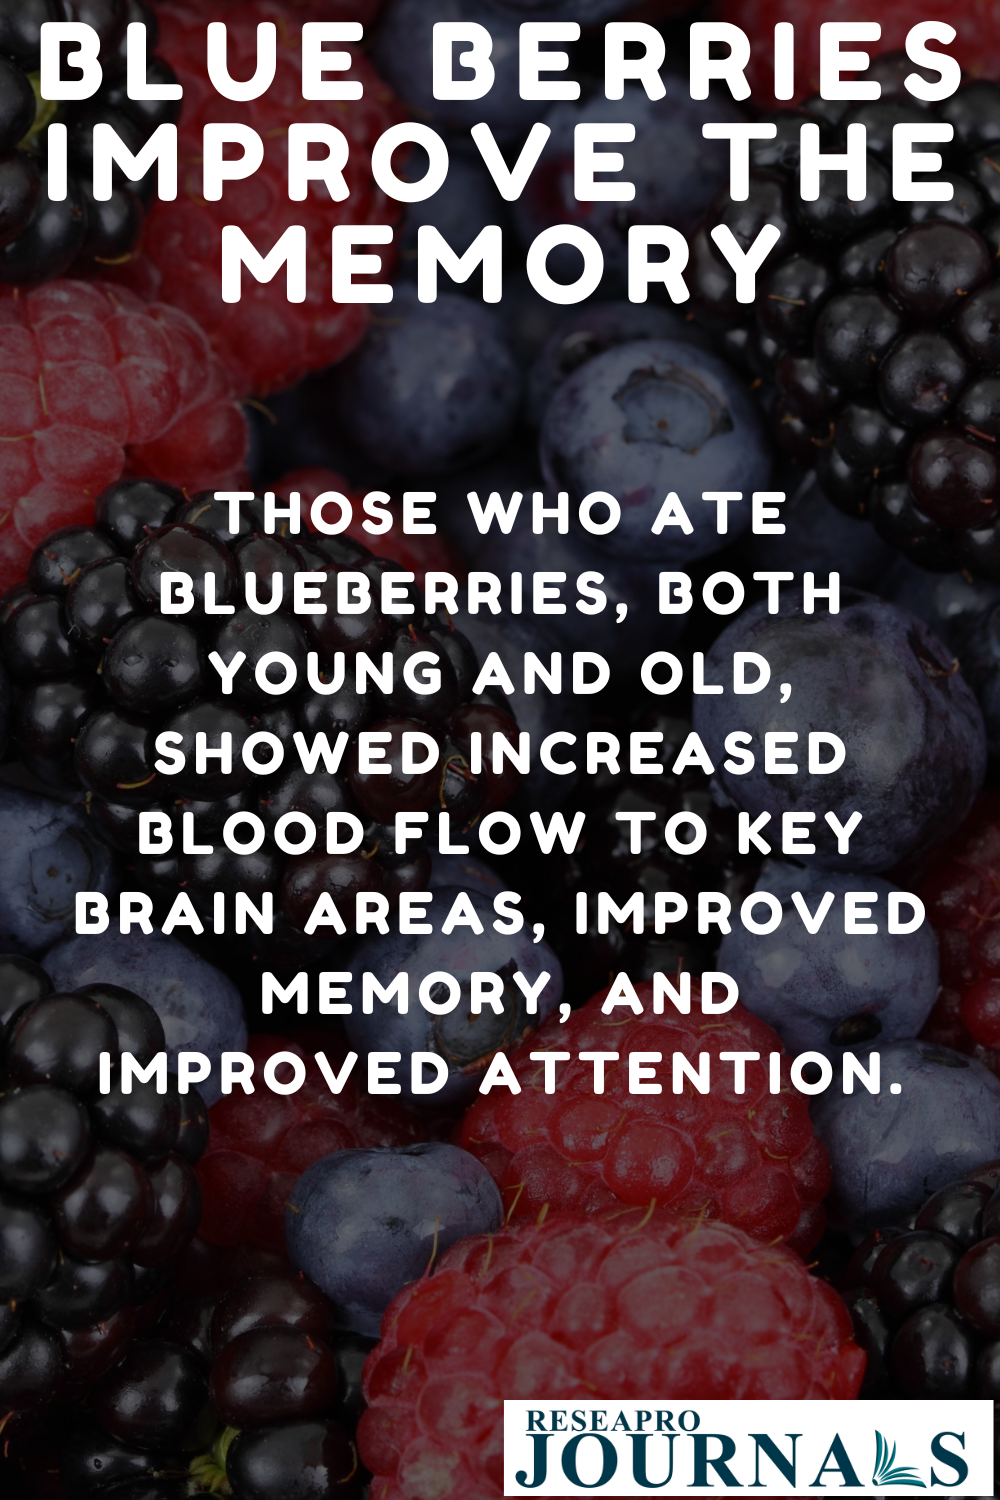 Berries should be considered a healthy part of day to day life